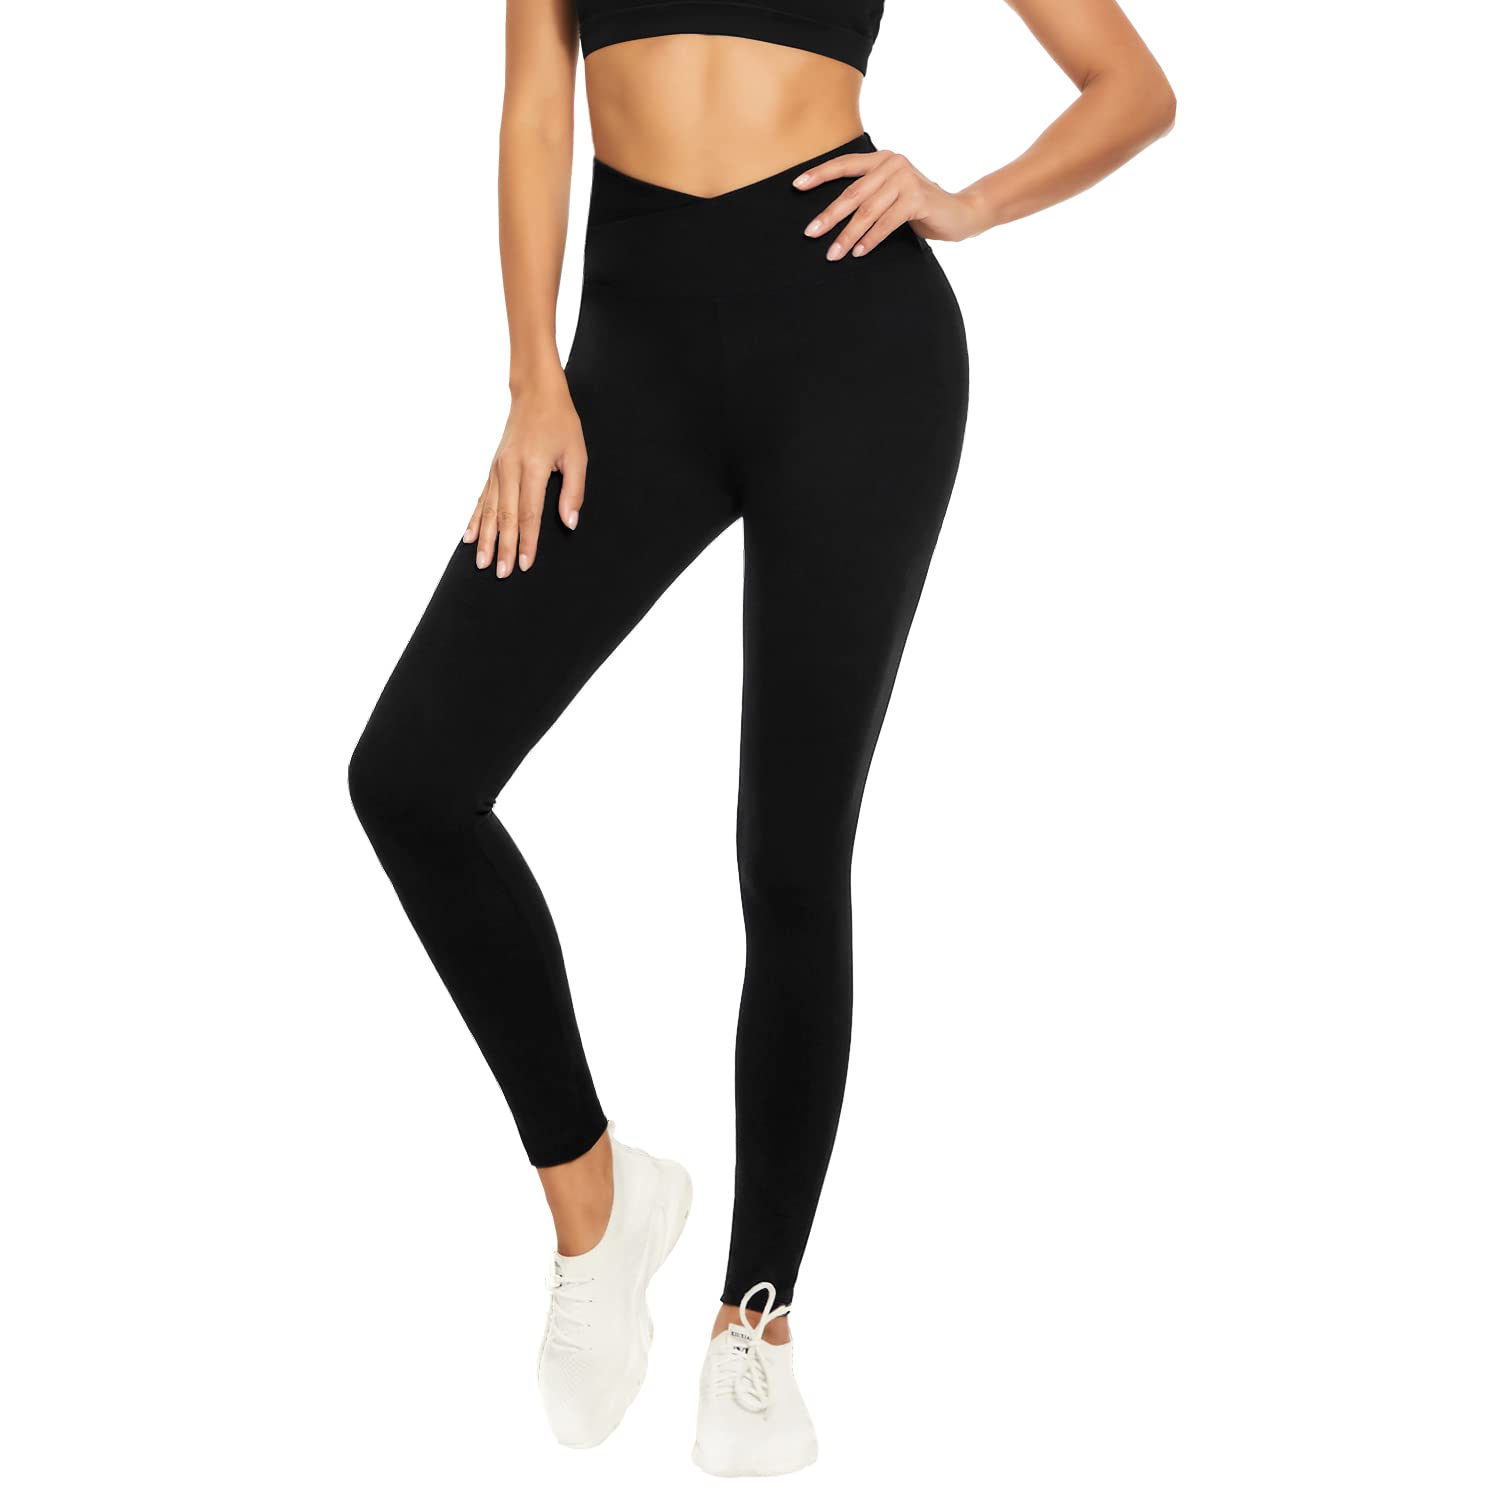 Buy Black Leggings for Women Non See Through-High Waisted Workout